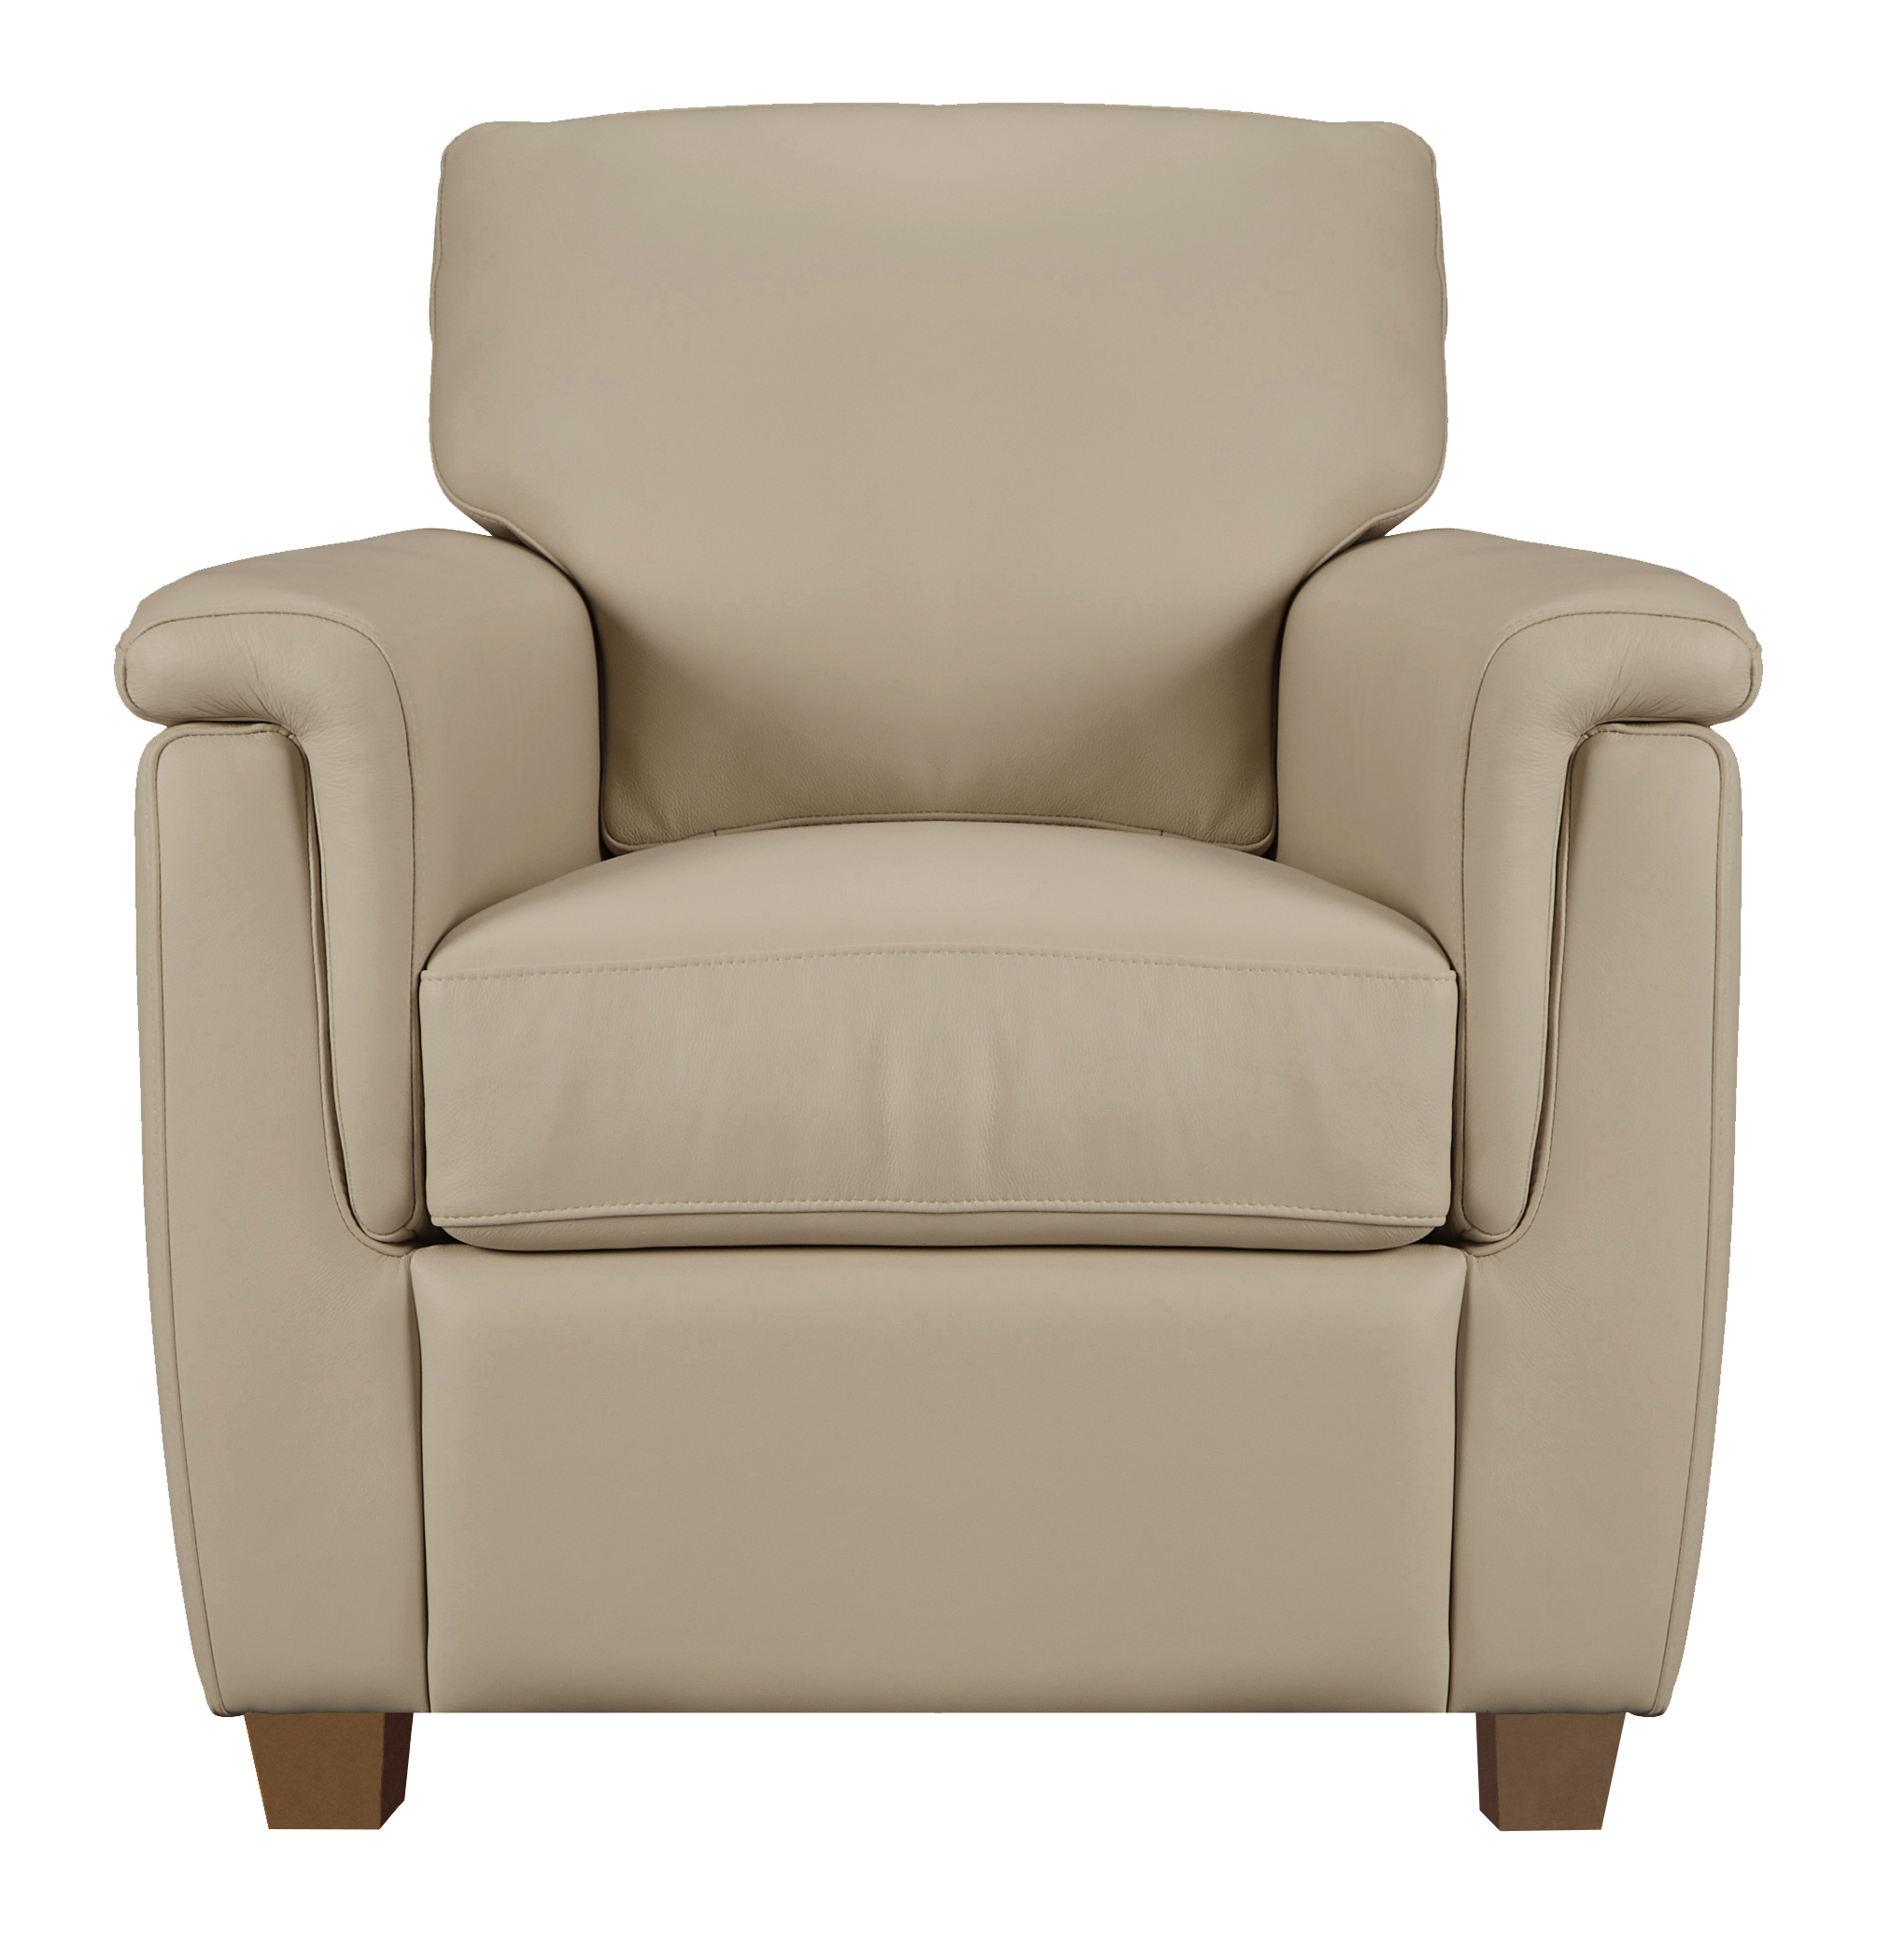 Stationary Solutions 209 Accent Chair